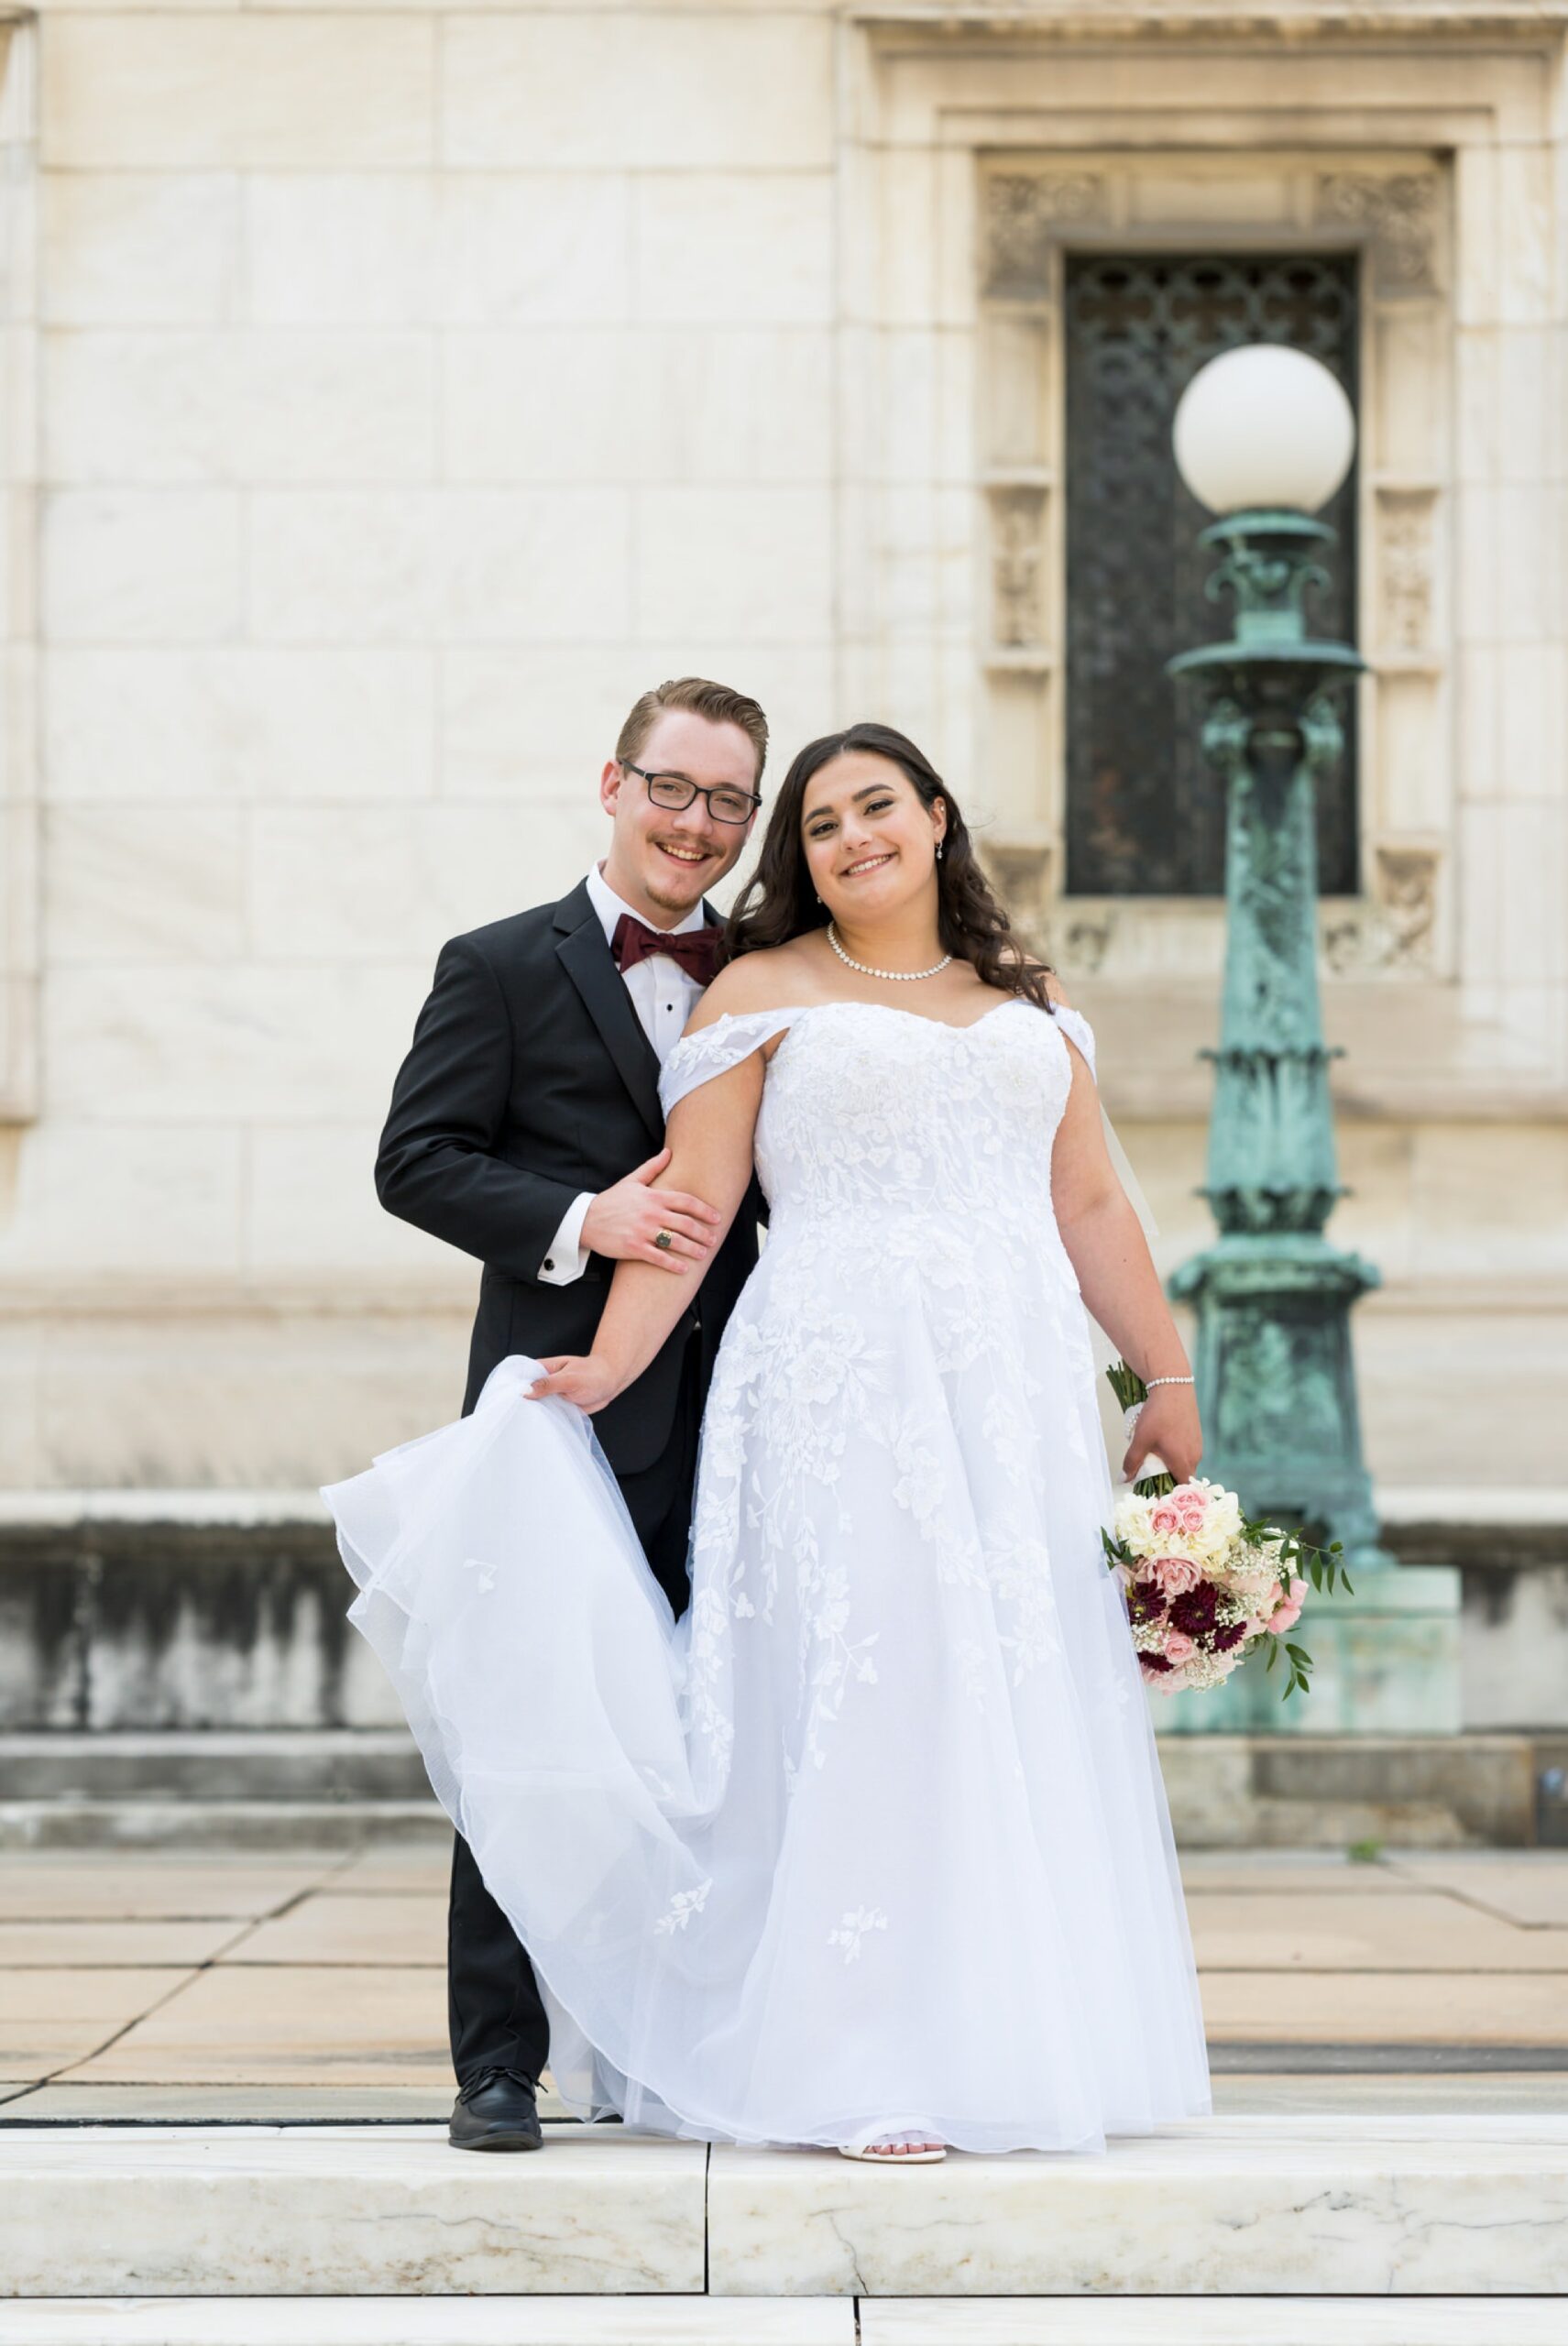 A bride and groom pose on their wedding day at the Detroit Public Library.  